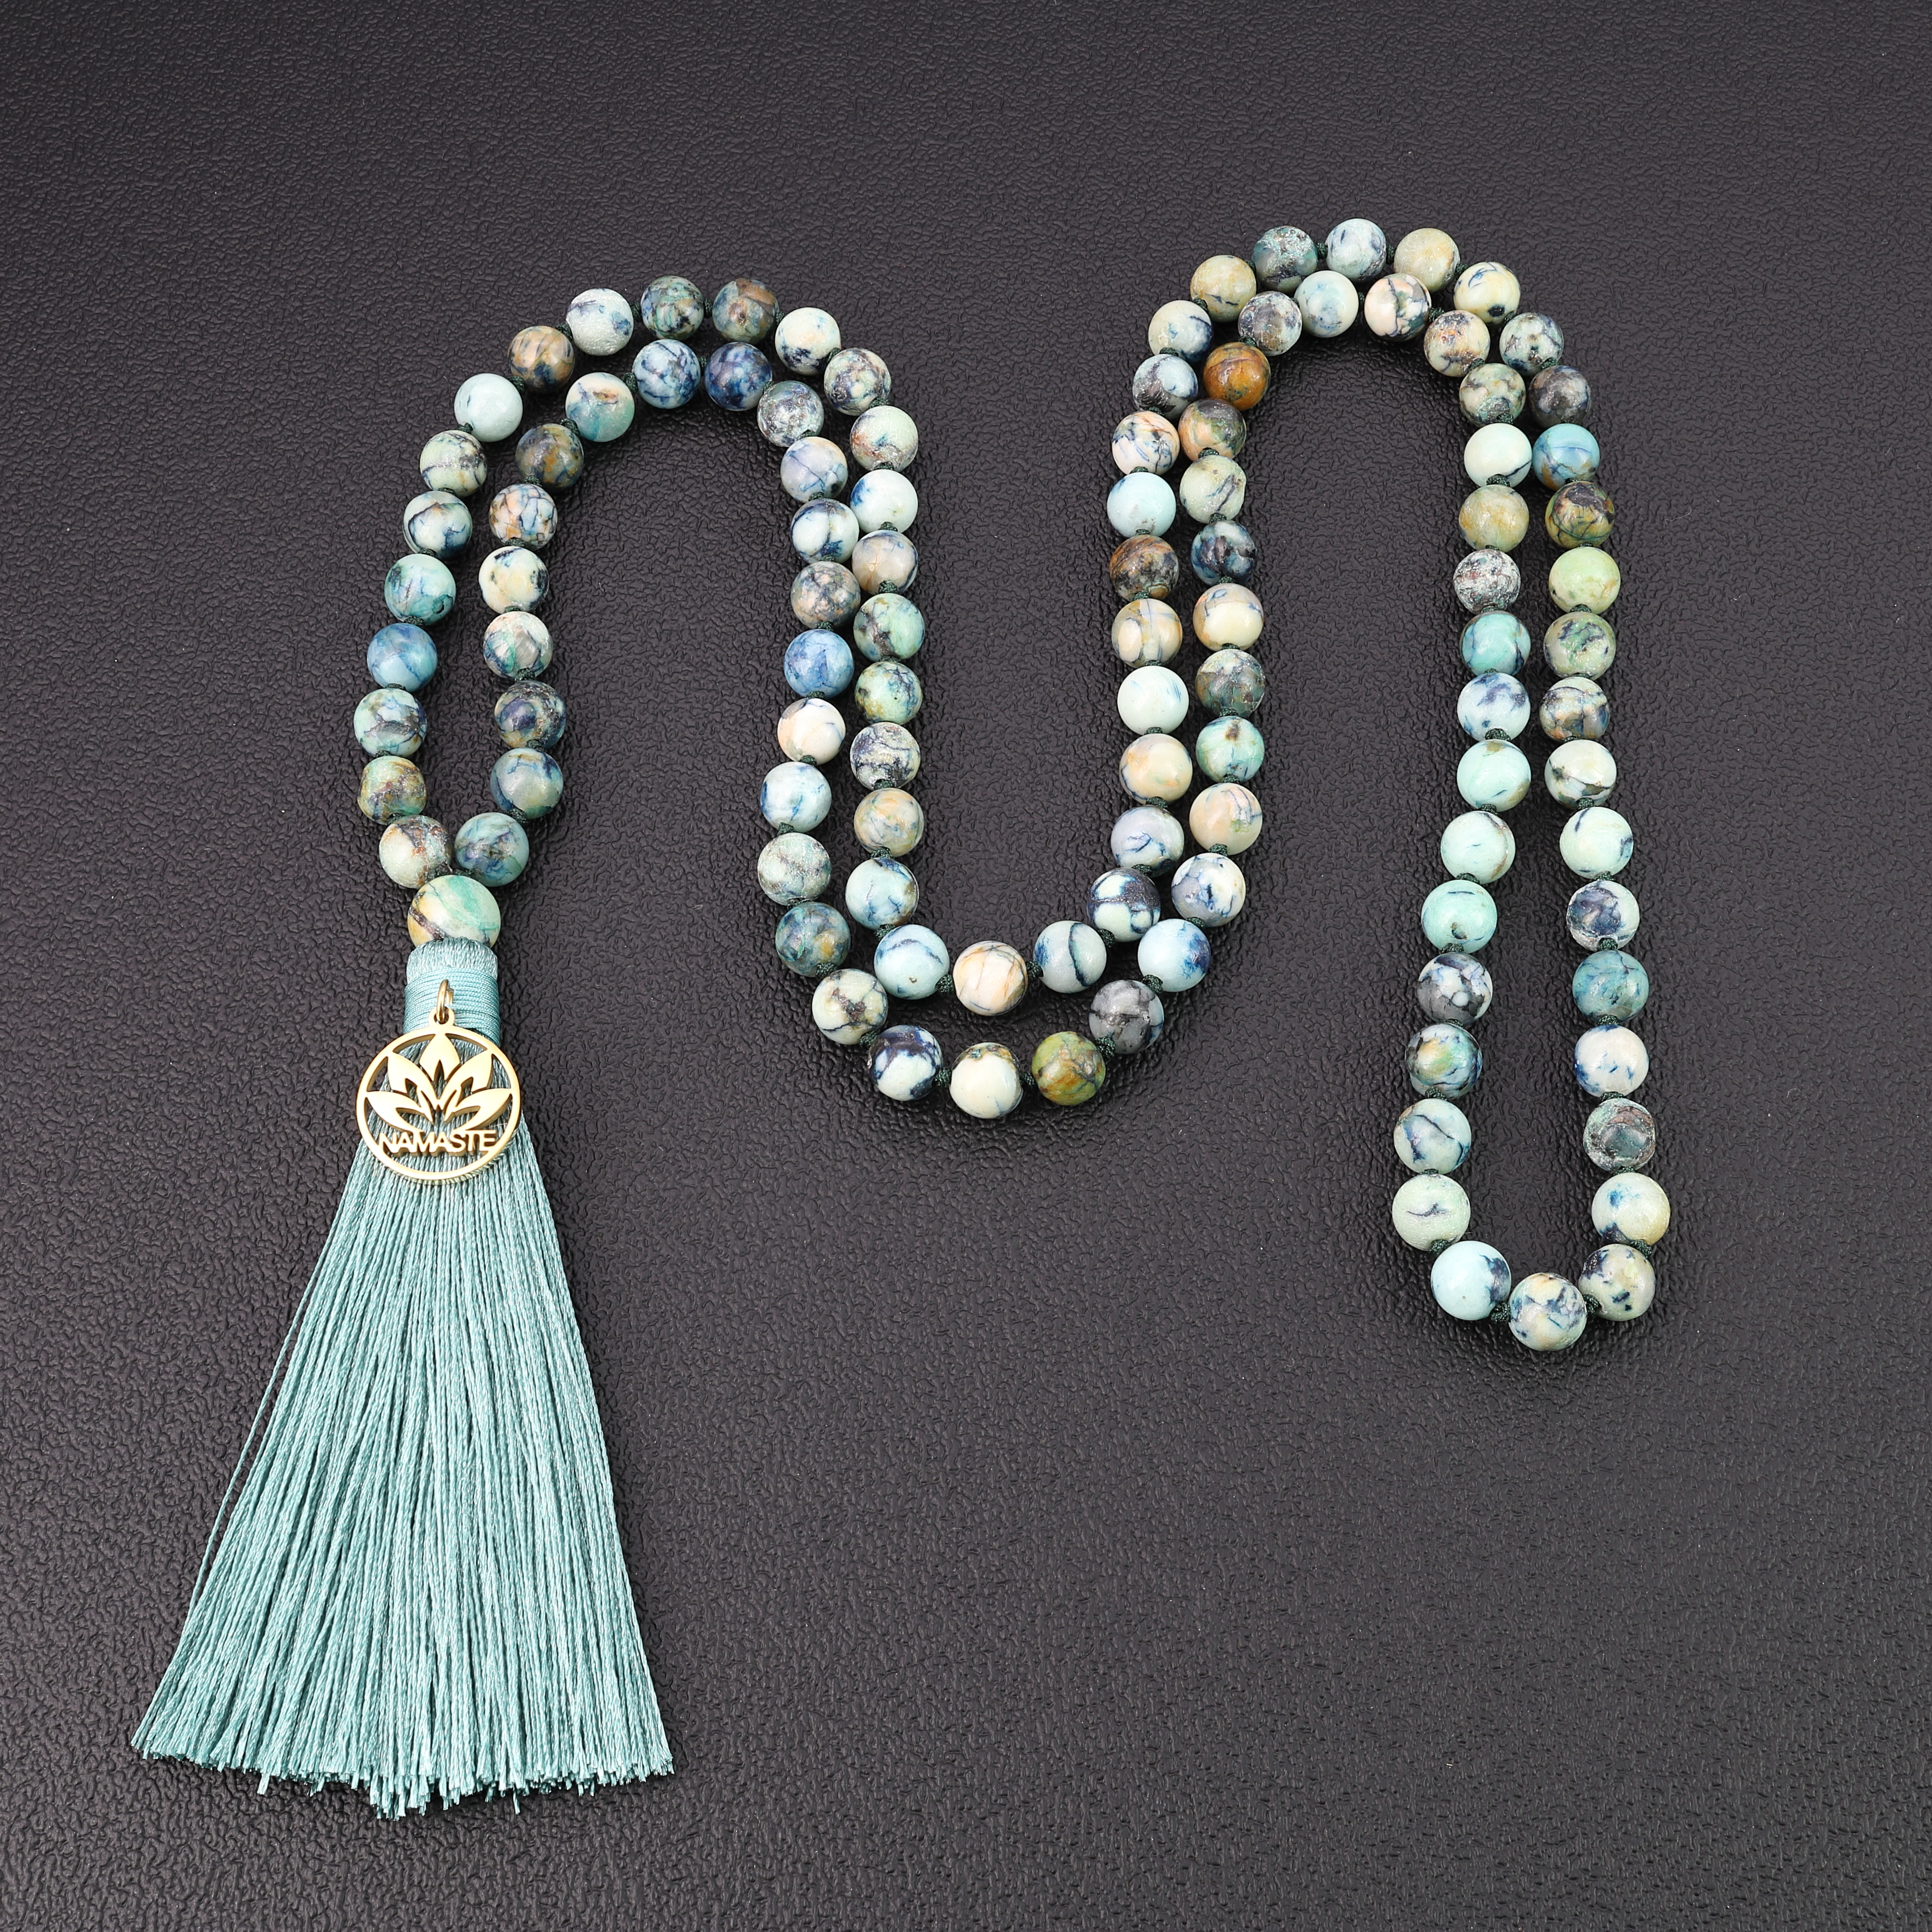 Ocean White Jade with blue & green hand-knotted 108 Mala Necklace